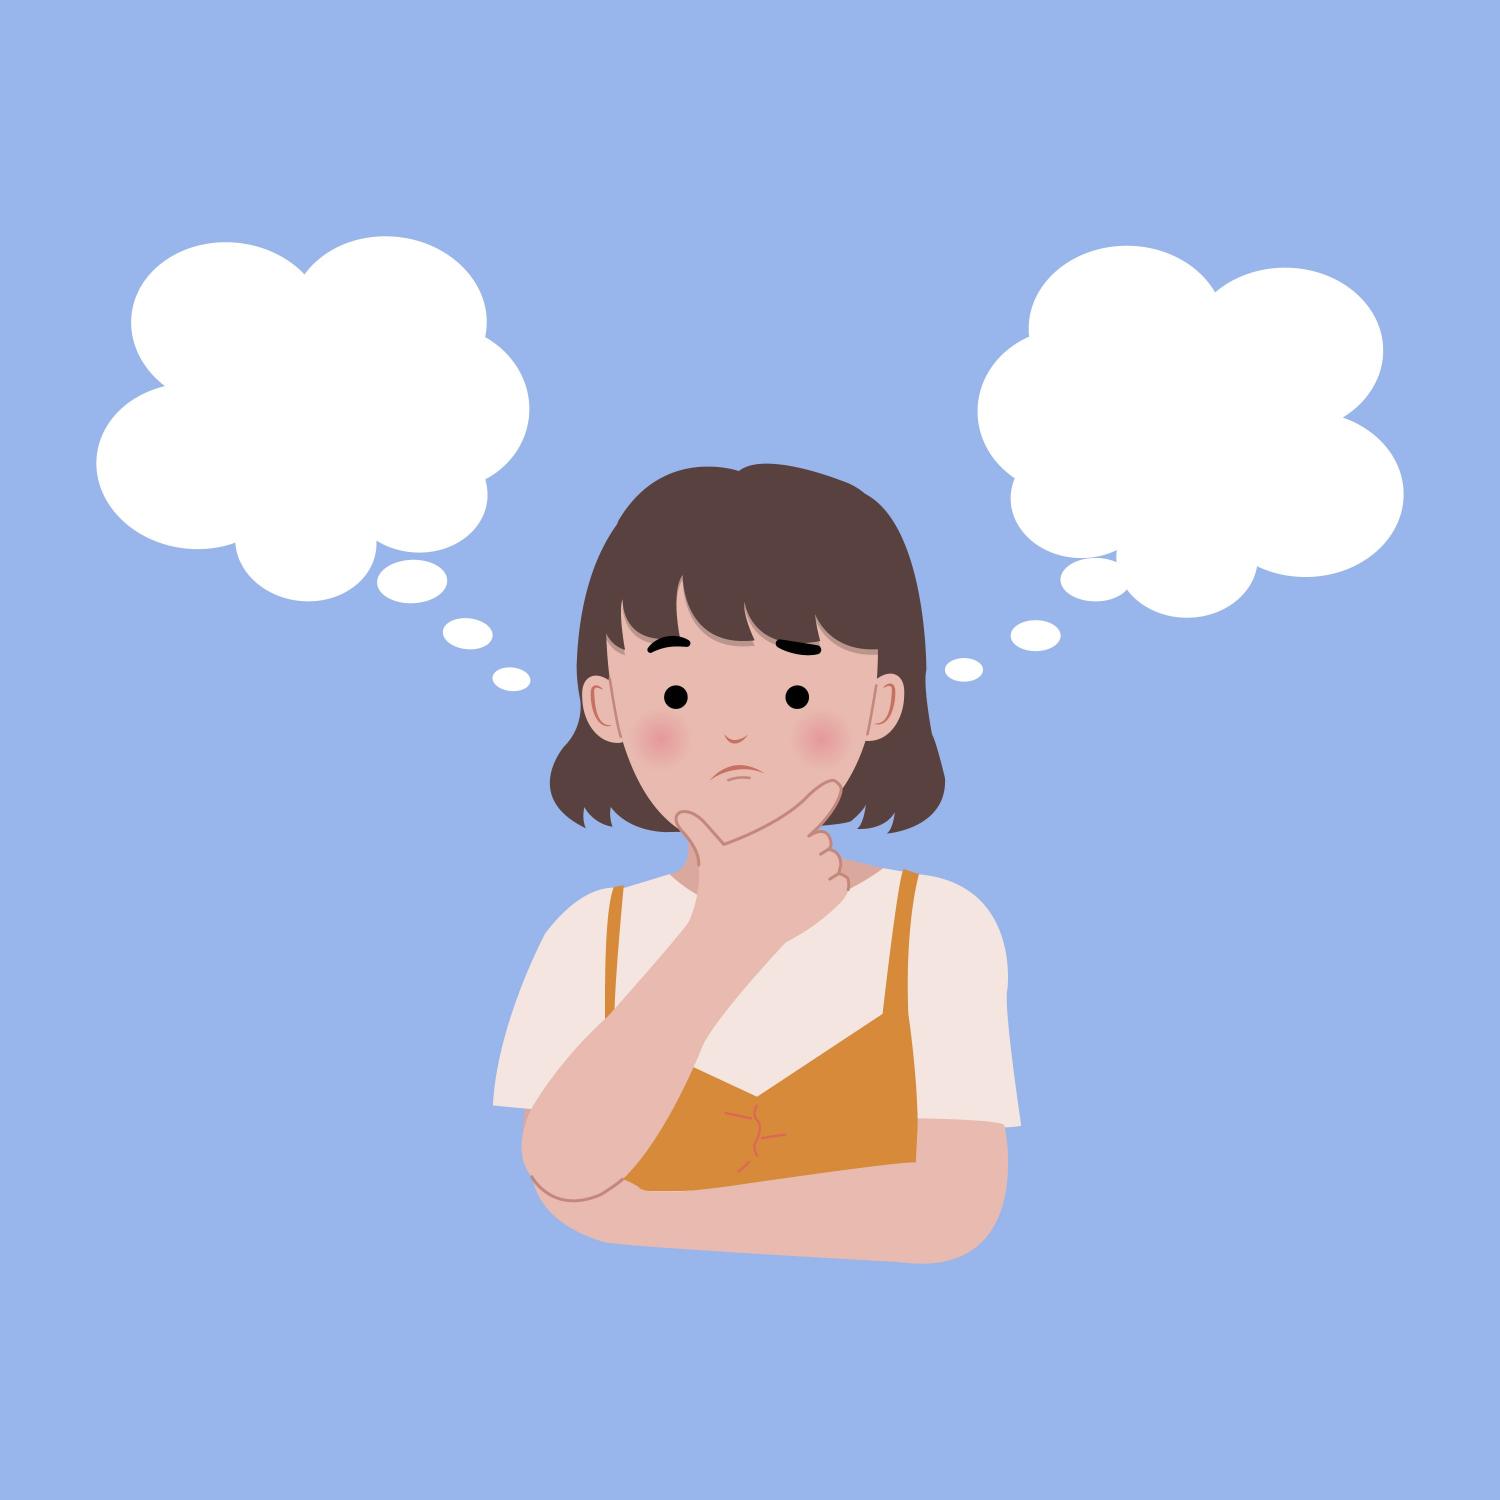 https://cdn.noron.vn/2021/09/11/young-woman-thinking-between-two-choices-vector-1631369958.jpg